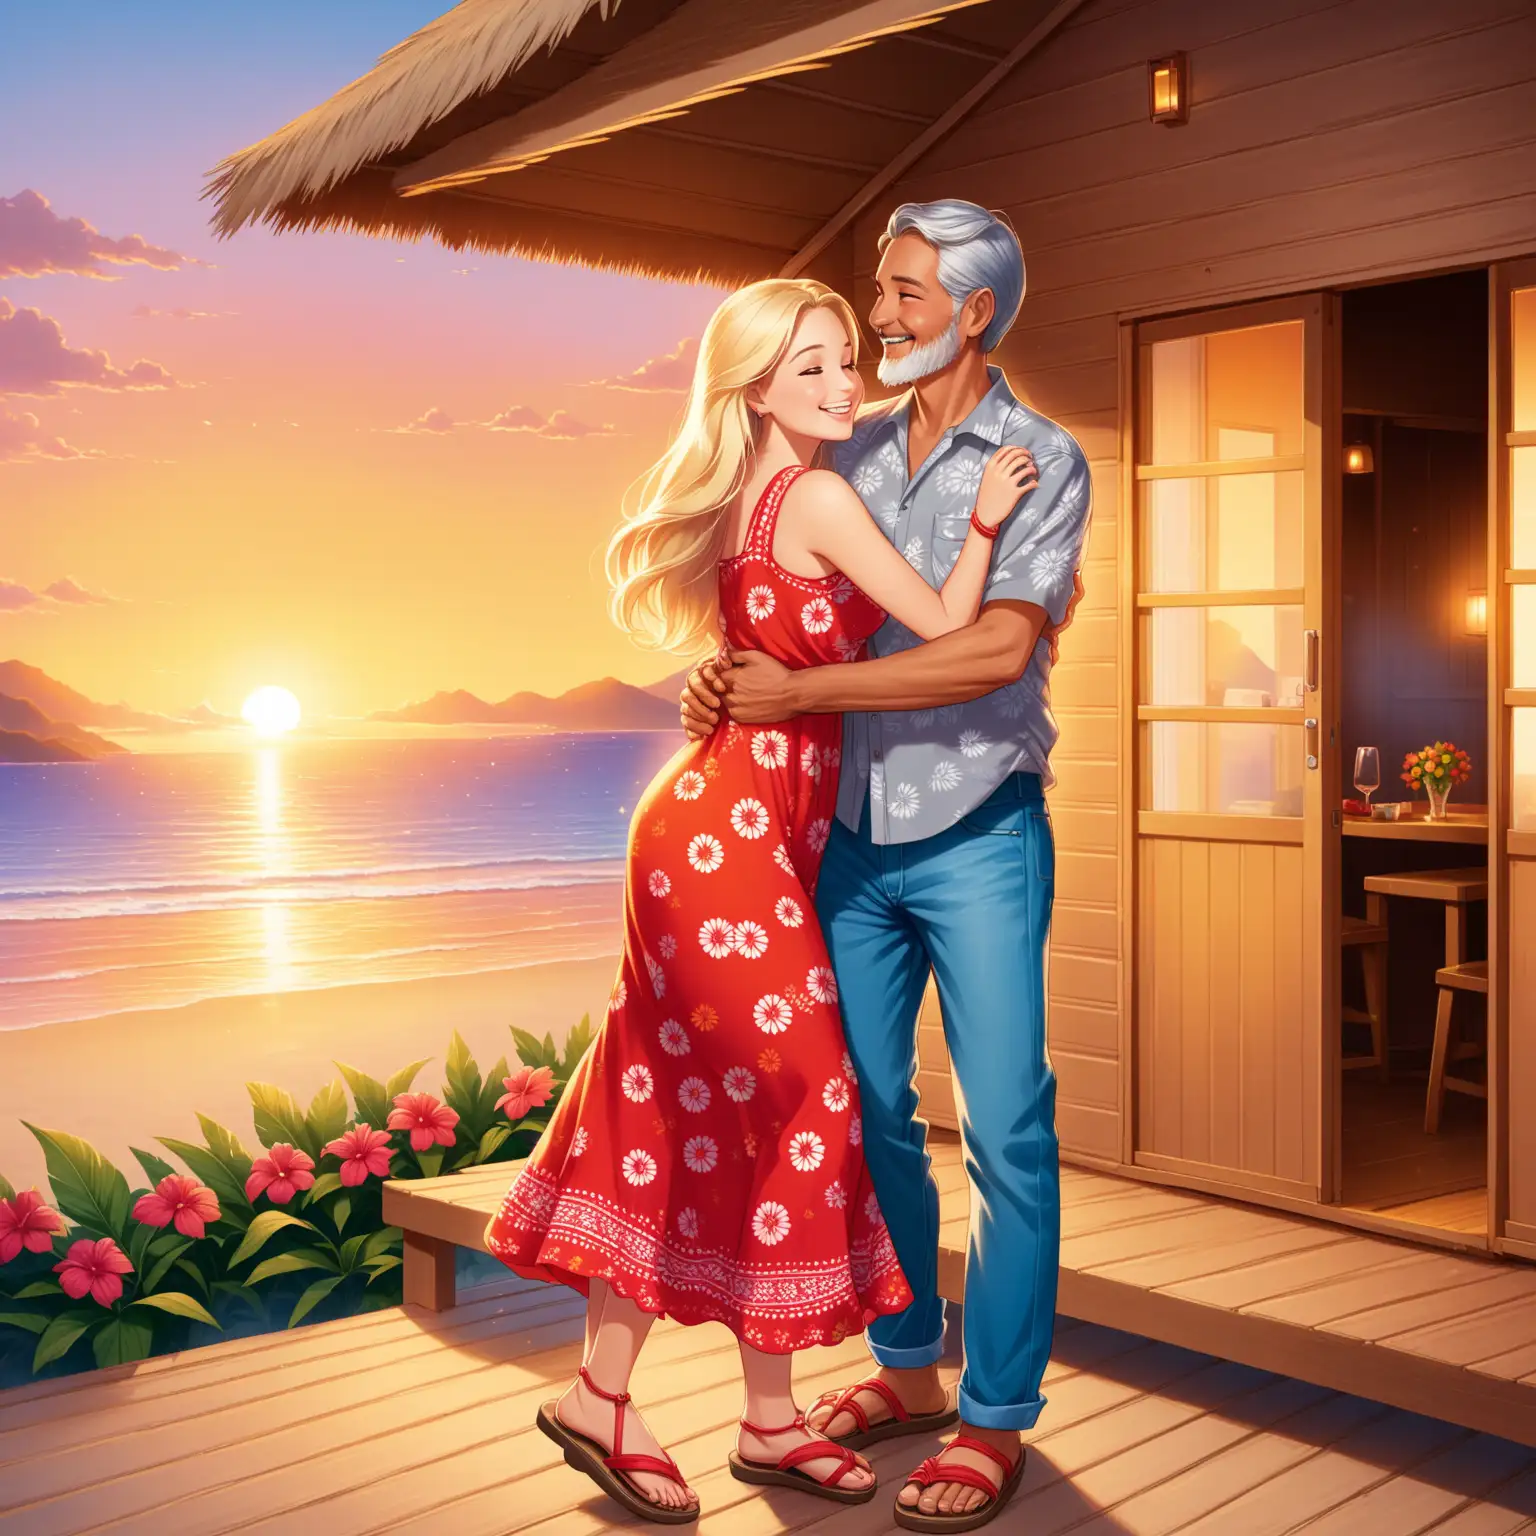 Romantic Sunset Dance Young Barbie and Older Andean Man on Beach Hut Terrace